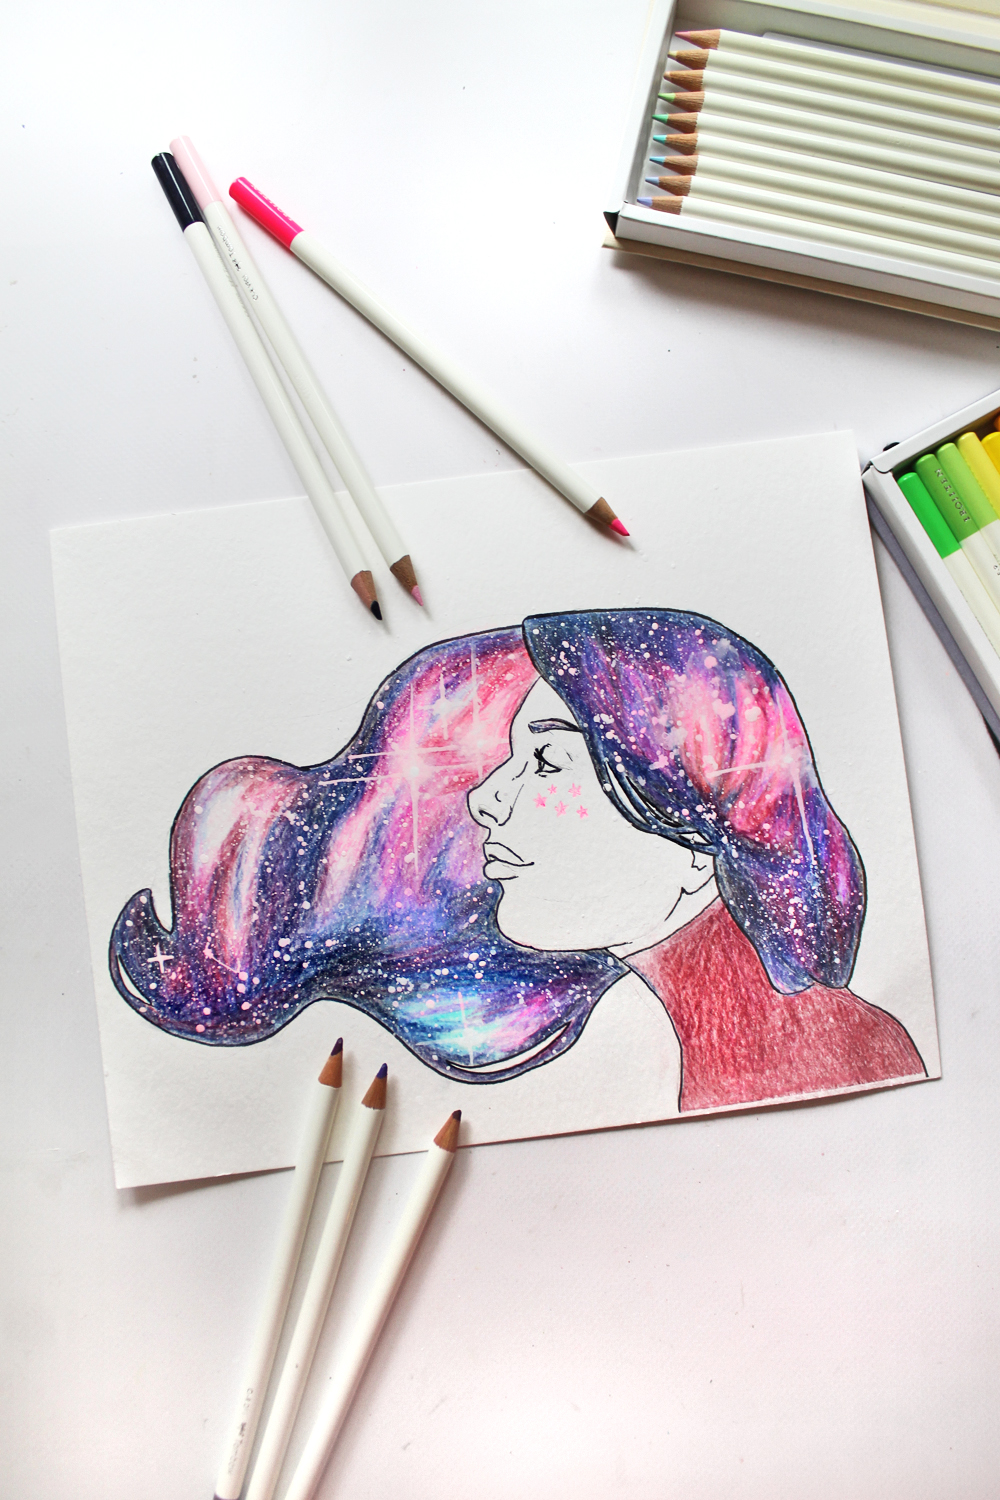 How To Draw A Nebula With Colored Pencils / 3:54 evanartsy 1 601 ...